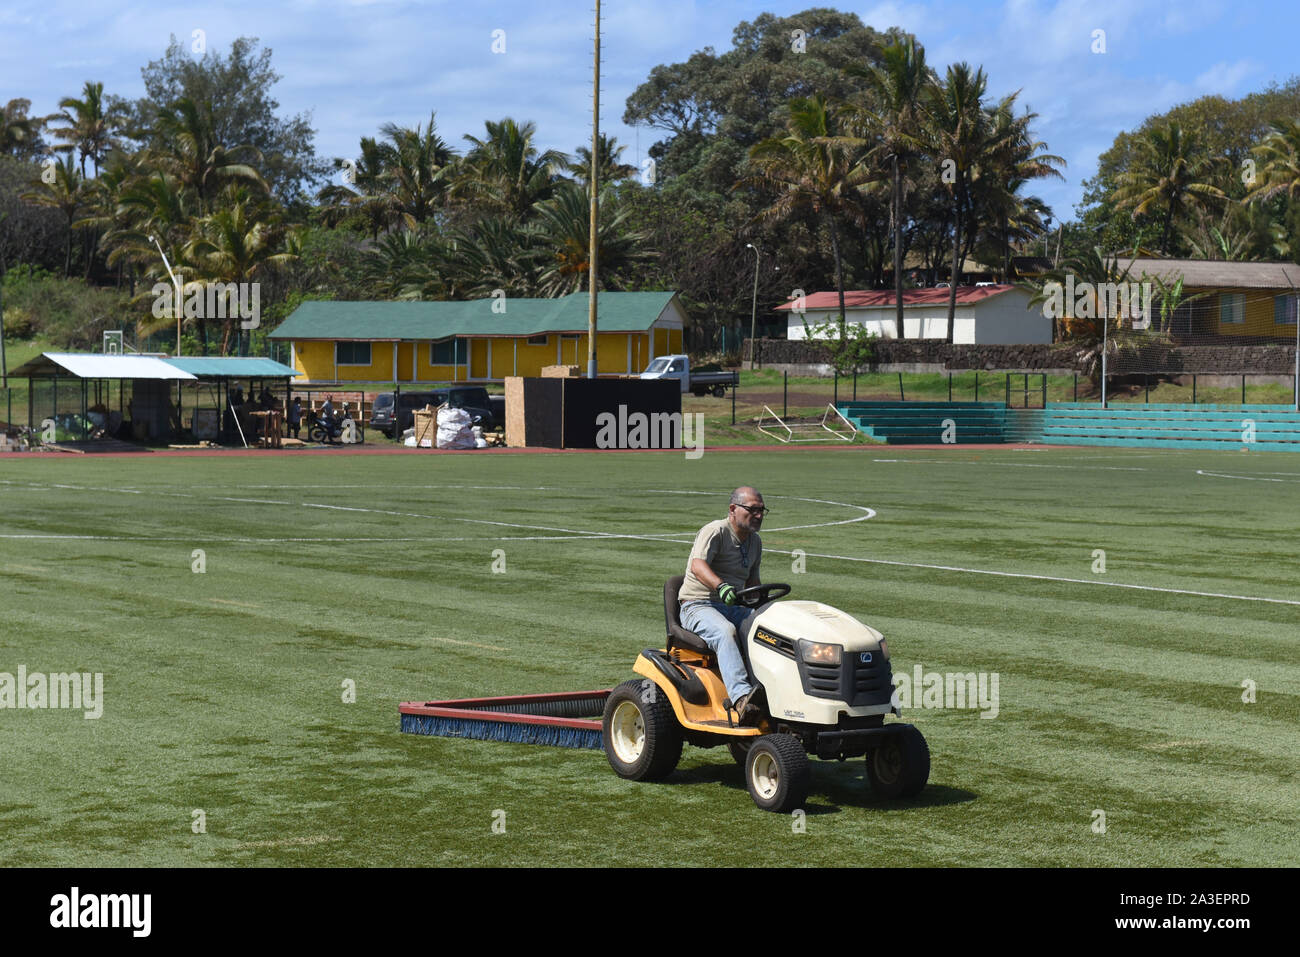 A groundsman cuts the grass with a mower ride on a sports field.Hanga Roa is the capital of Easter Island, a Chilean island in the southeastern Pacific Ocean. The village has around 5,000 inhabitants, which comprises between 87 and 90 percent of the total population of the island. Excluding a small percentage still engaged in traditional fishing and small-scale farming, the majority of the population is engaged in tourism which is the main source of income. Stock Photo